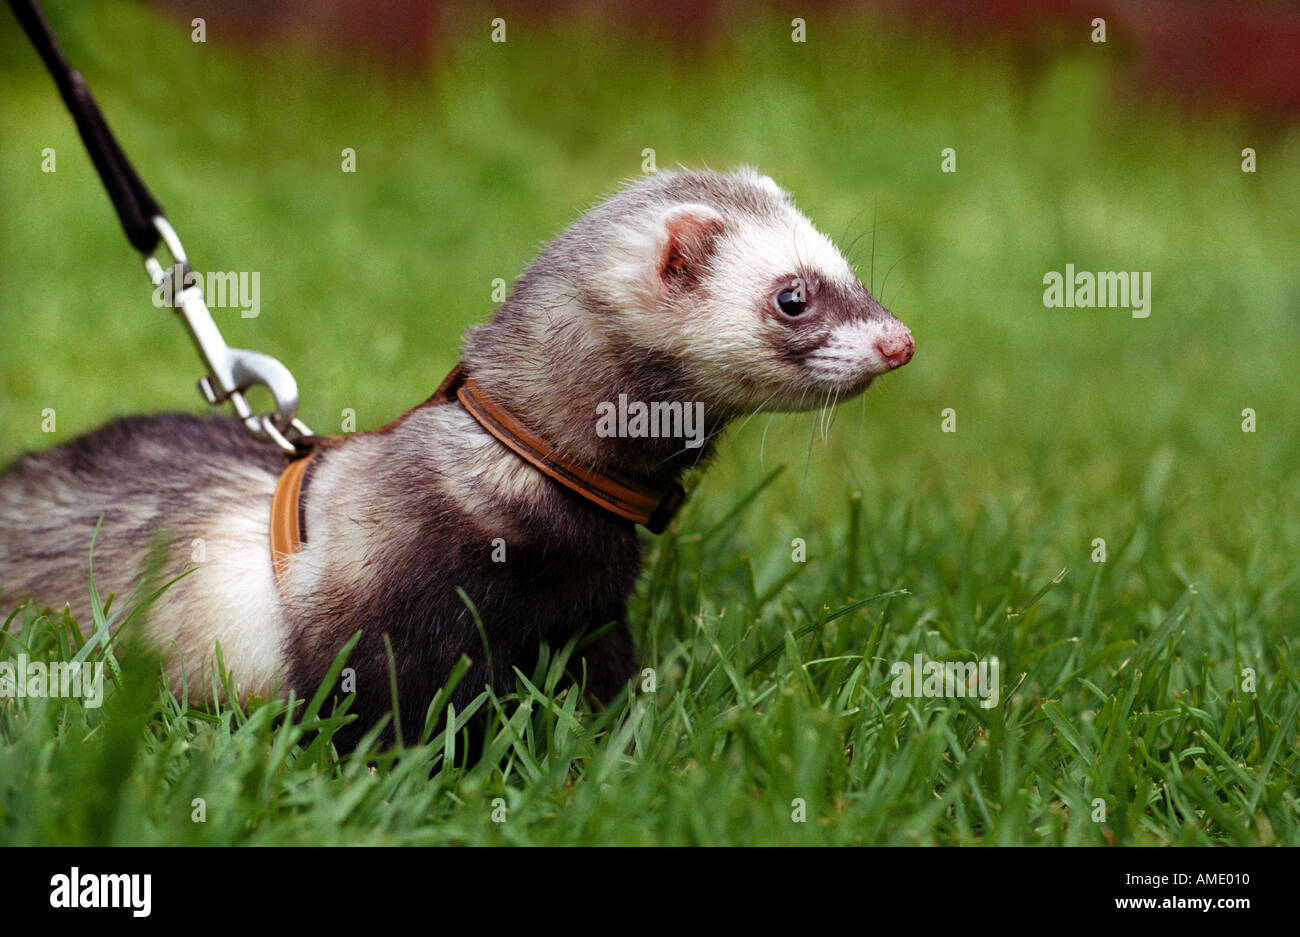 Ferret on a lead in grass Stock Photo